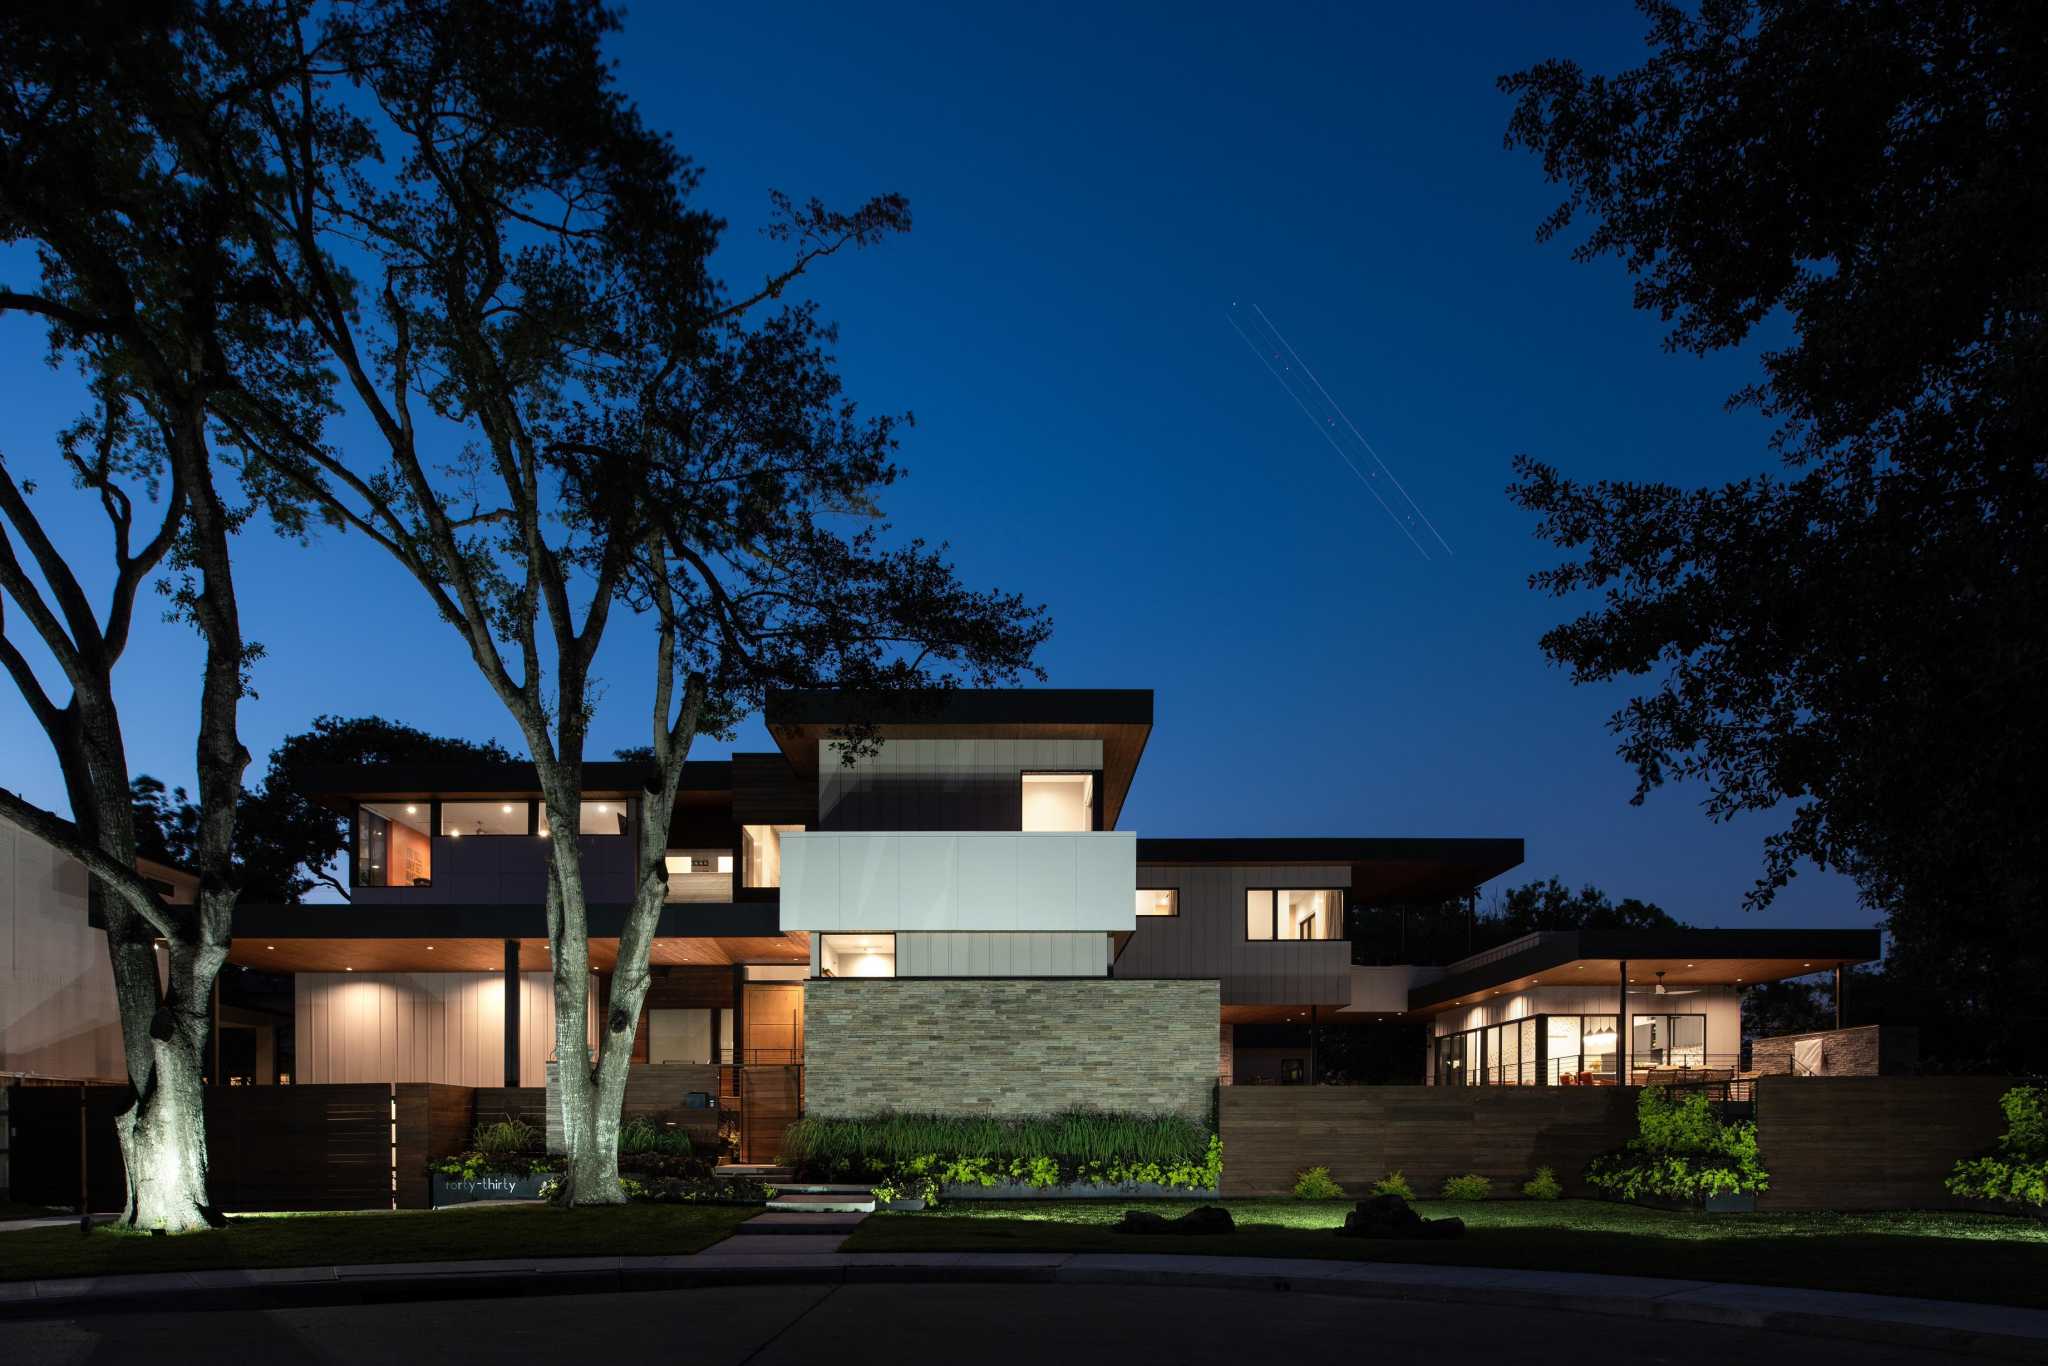 Houston’s Modern Homes Tour is back in person, with houses from River Oaks to Braeswood